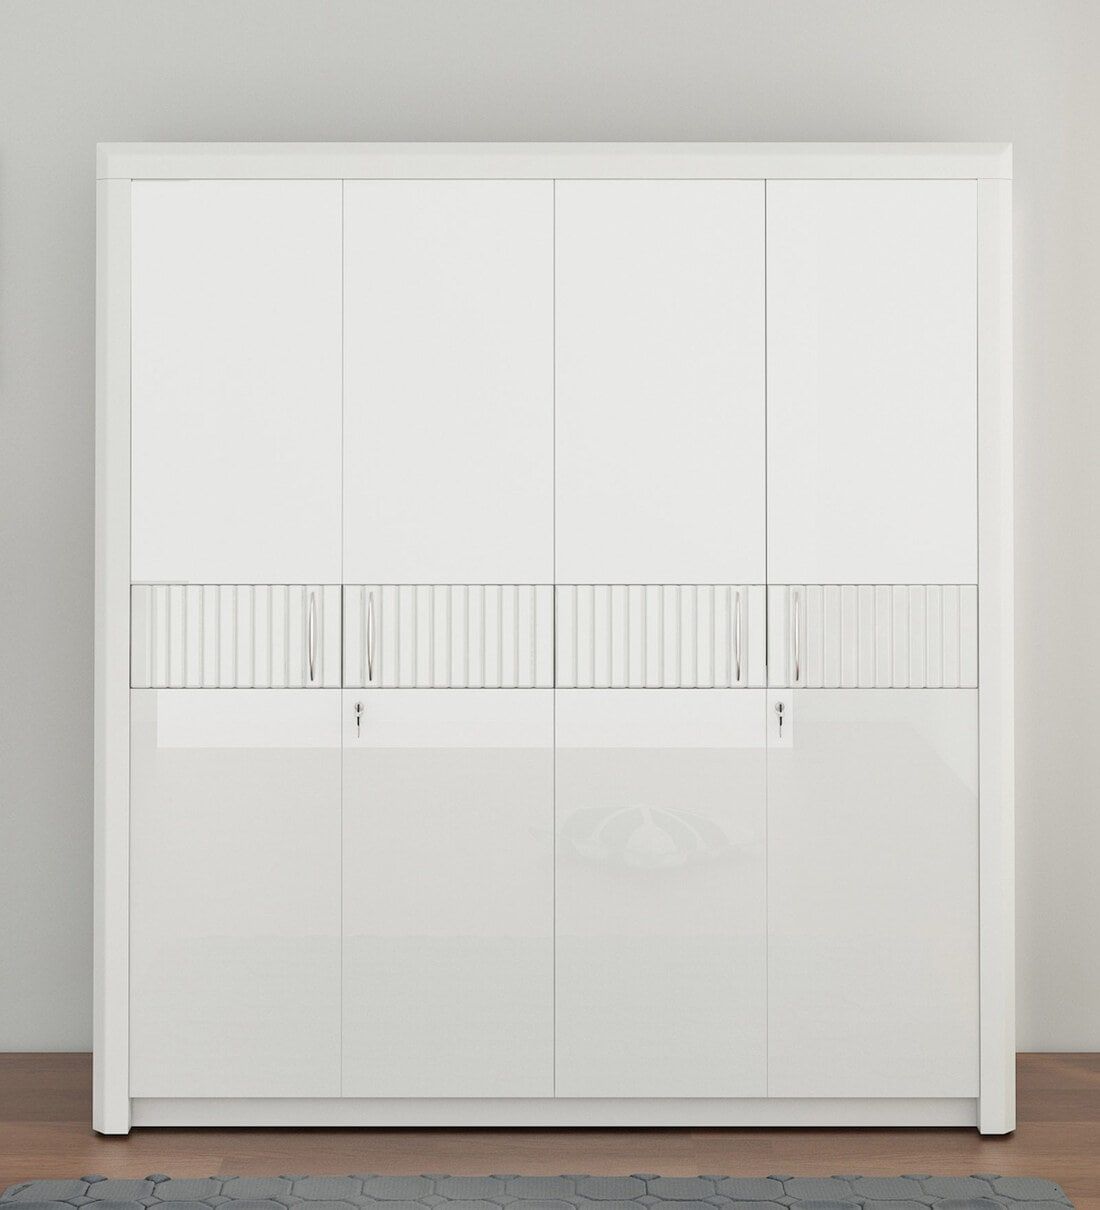 Buy Kosmo Arctic 4 Door Wardrobe In High Gloss White Finish At 31% Off Spacewood | Pepperfry Regarding Arctic White Wardrobes (View 10 of 15)